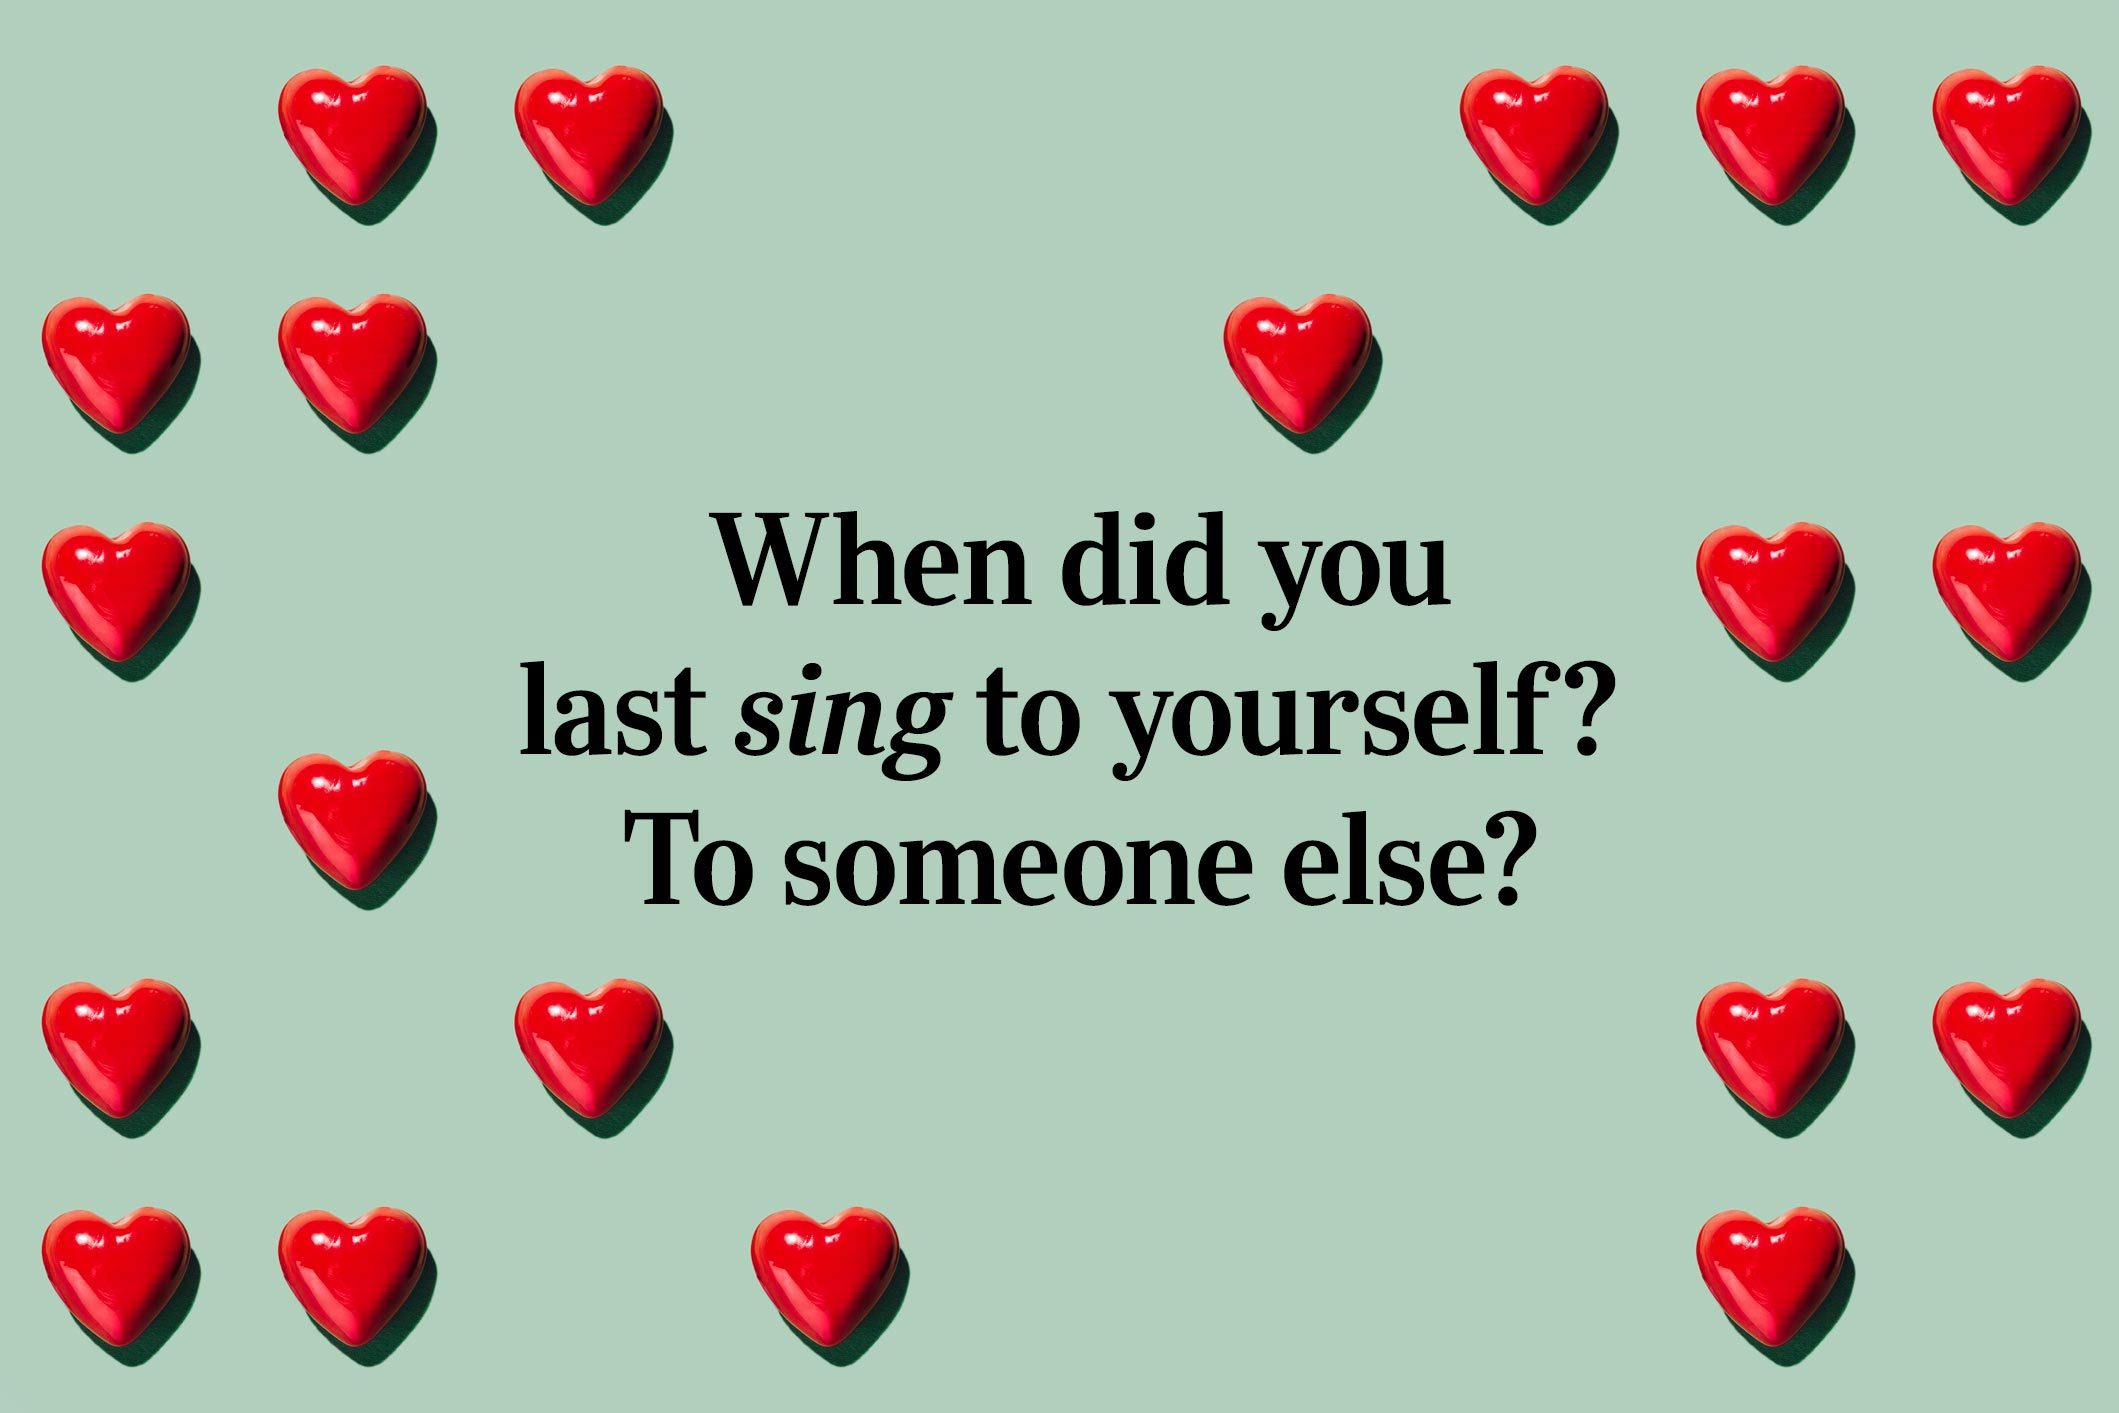 <p>Perhaps the first of the more intimate of these 36 questions to fall in love: When did you last sing to yourself? How about to someone else?</p> <p><a href="https://www.rd.com/article/karaoke-for-home/">Karaoke</a>, anyone?</p>